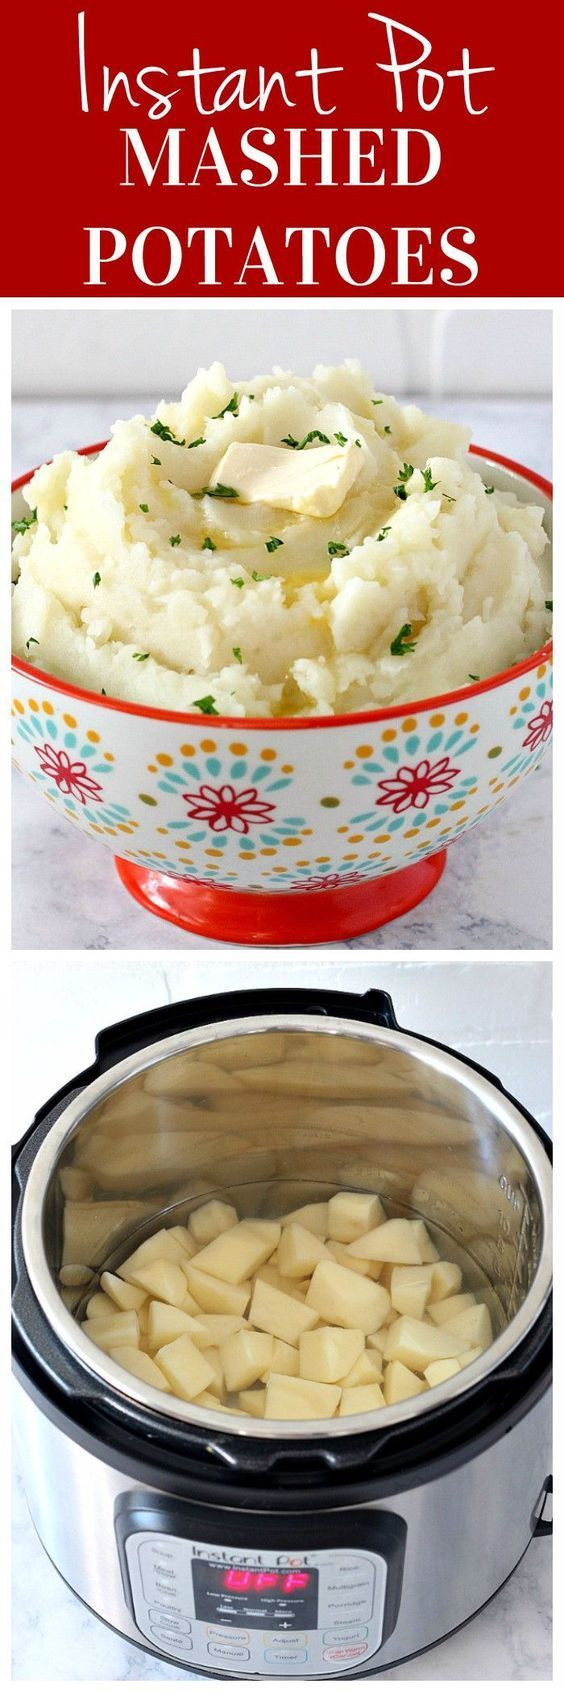 Are Instant Mashed Potatoes Healthy
 Best 25 Summer recipes ideas on Pinterest